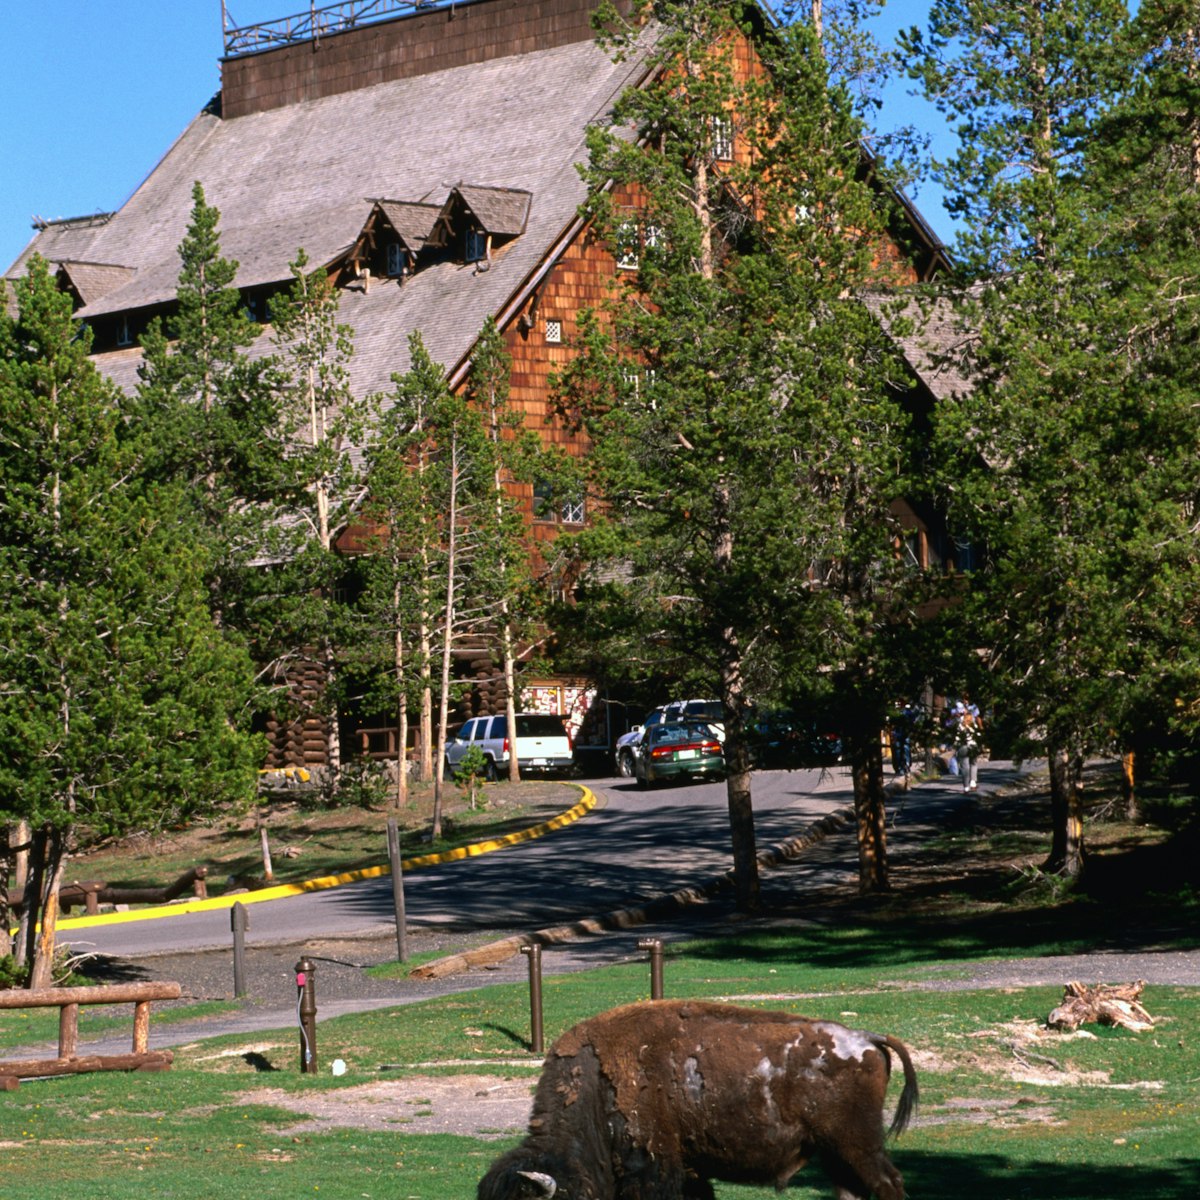 Bison grazing near the entrance to the Old Faithful Inn in Yellowstone.